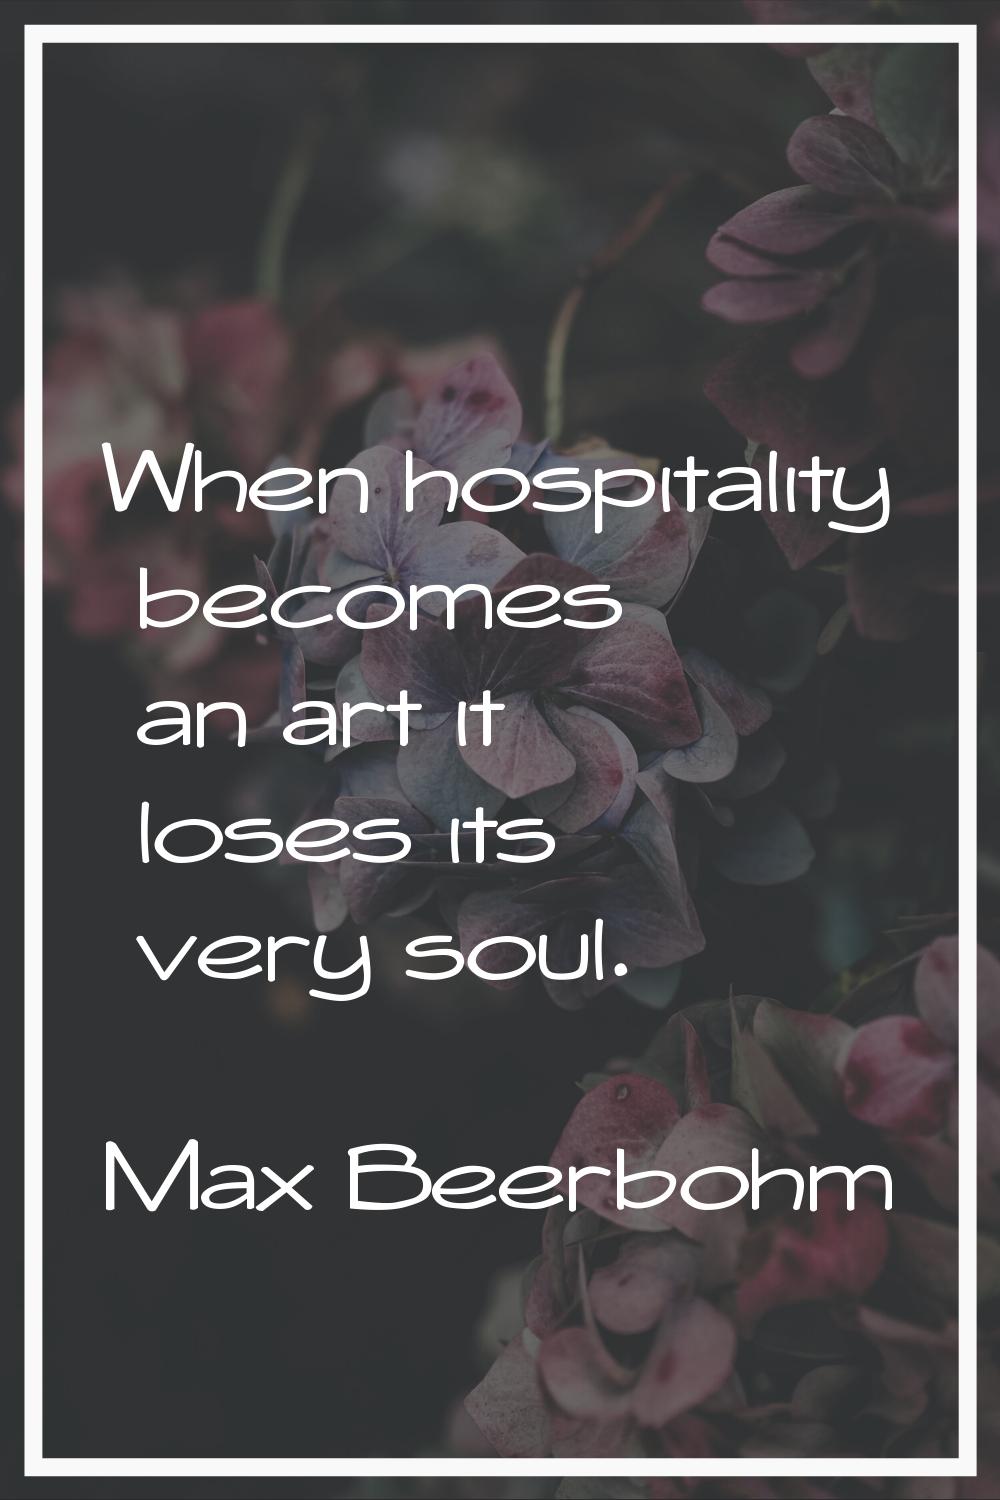 When hospitality becomes an art it loses its very soul.